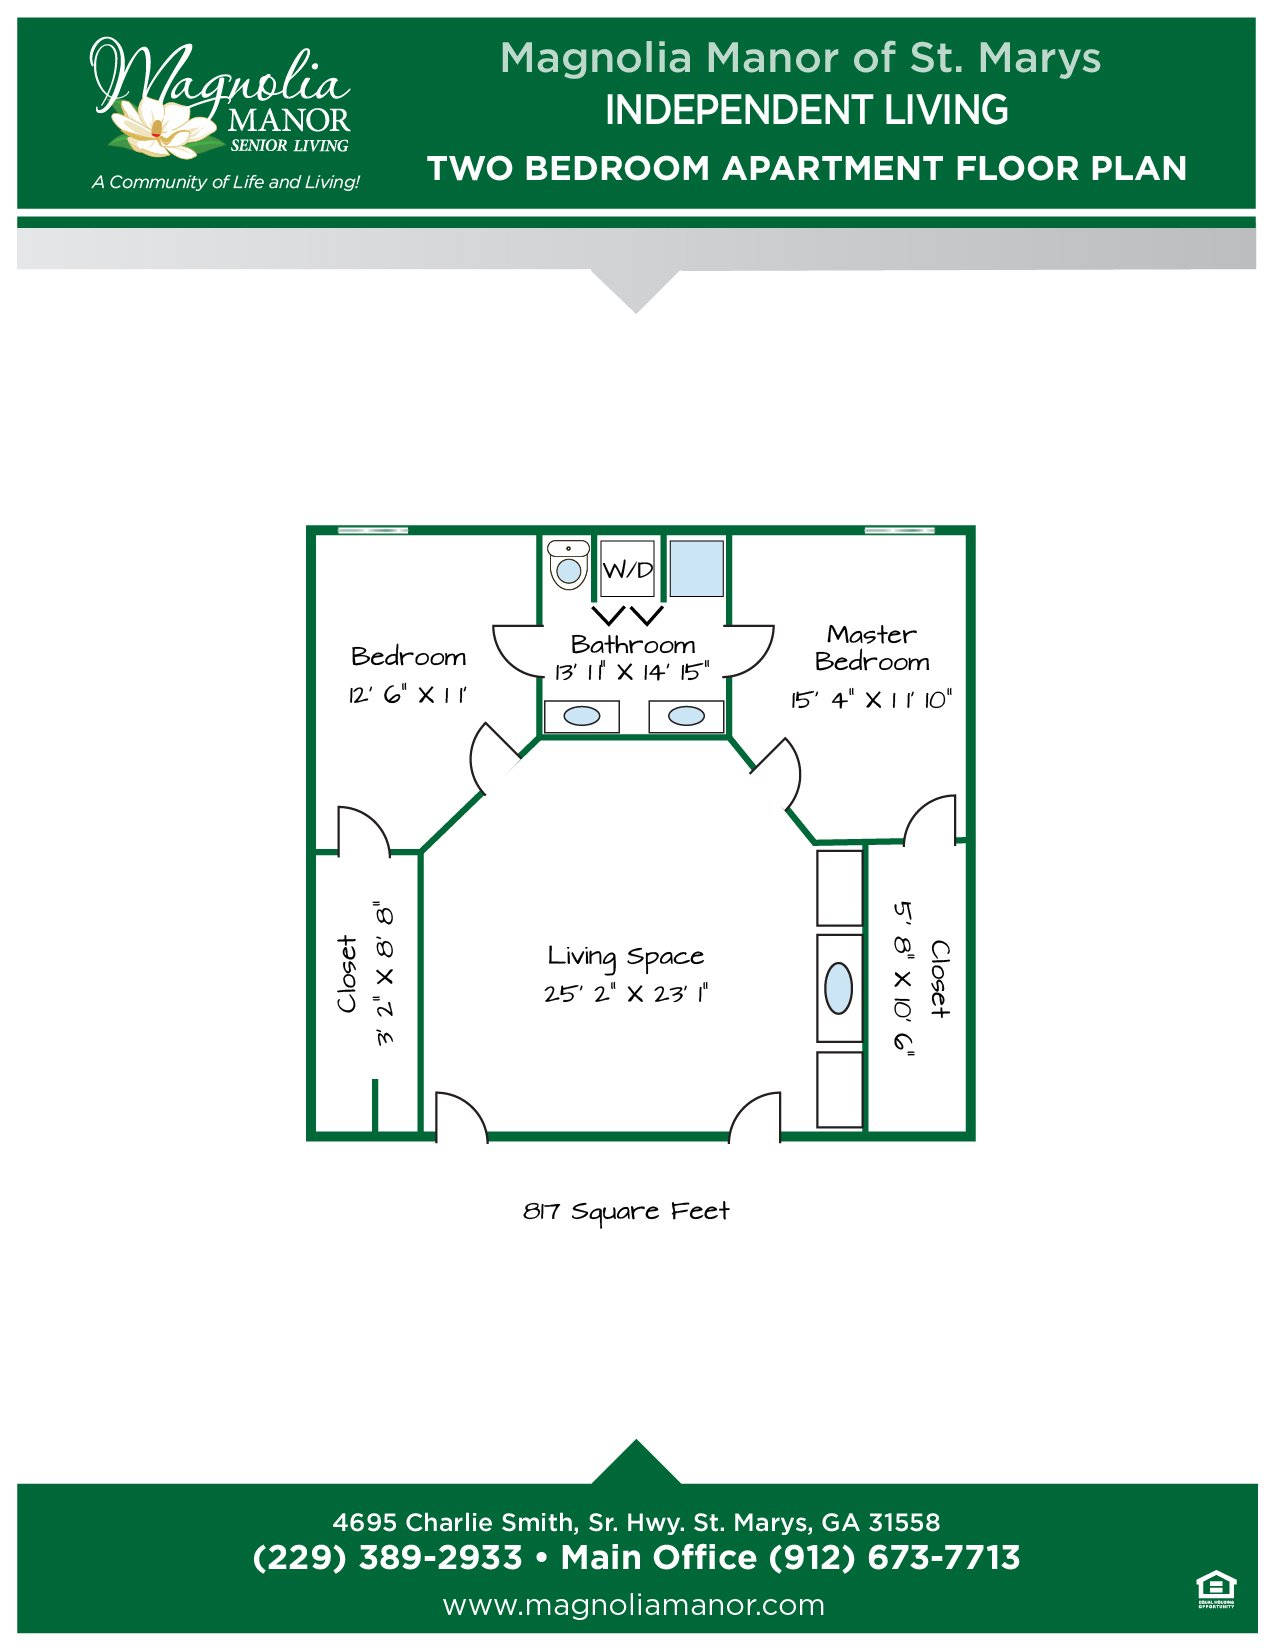 00344 St Marys Two Bedroom Apartment Floor Plans IL 2019-01